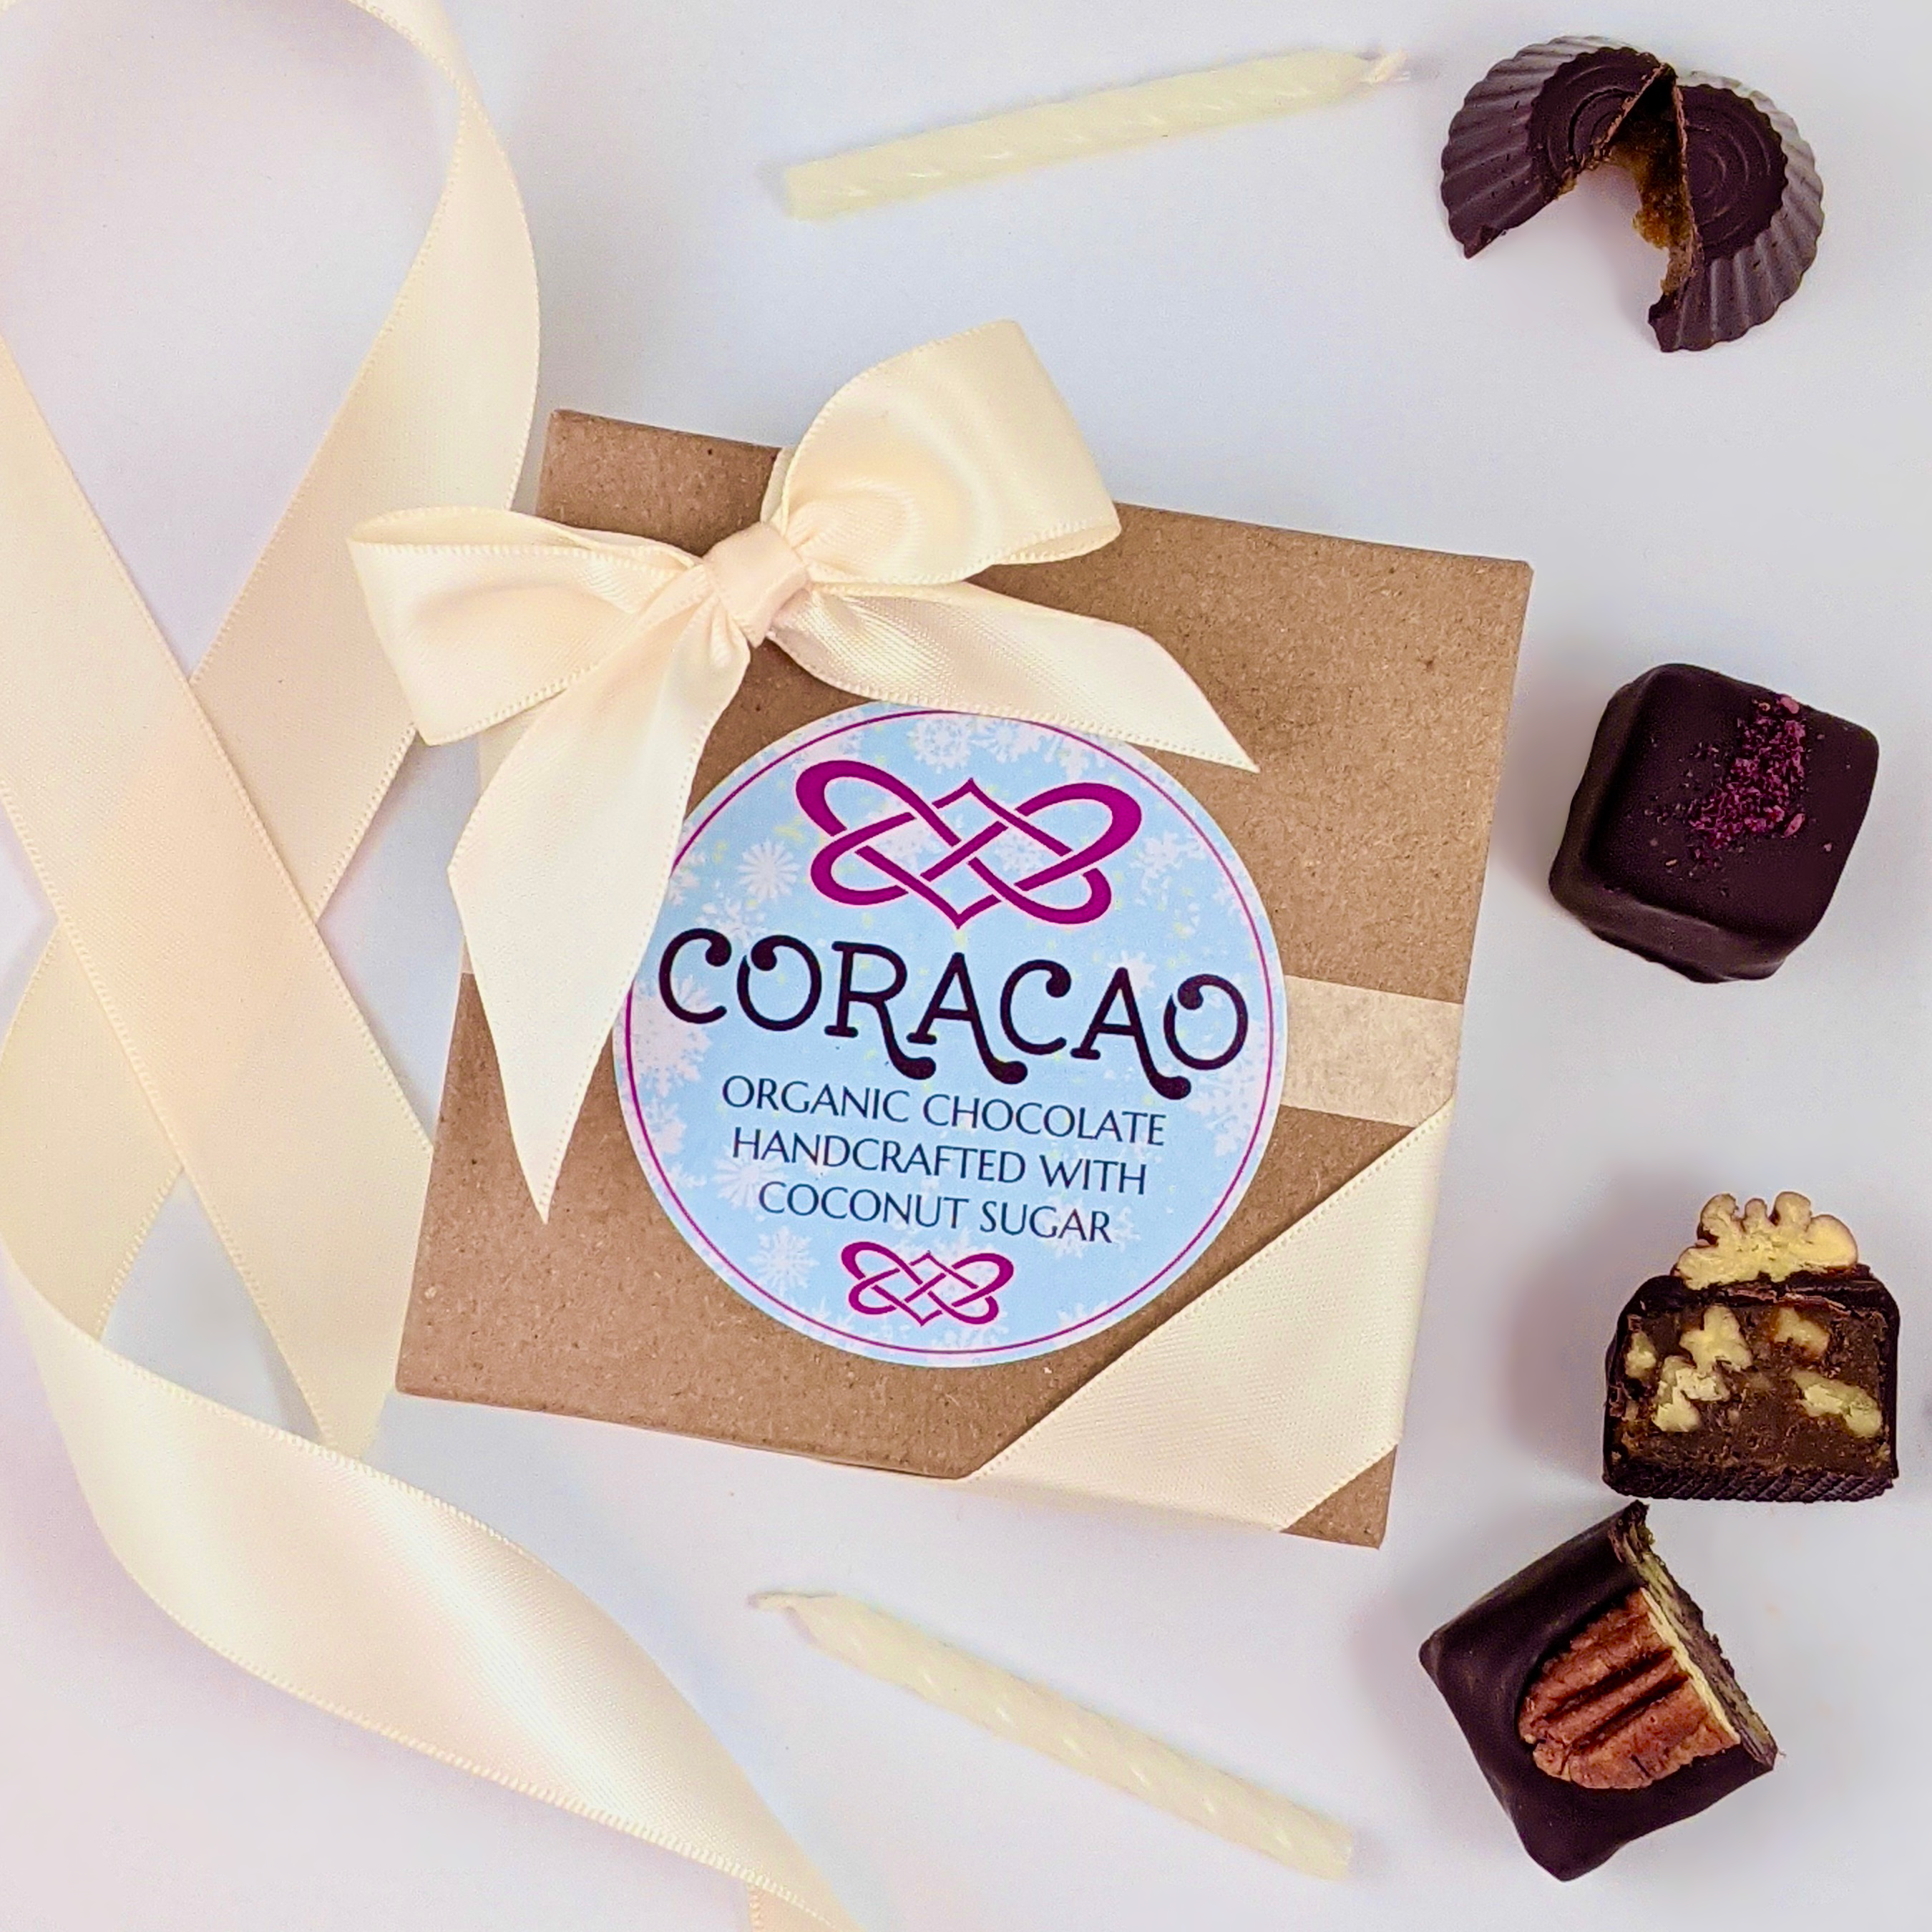 LIGHT UP HANUKKAH WITH CACAO